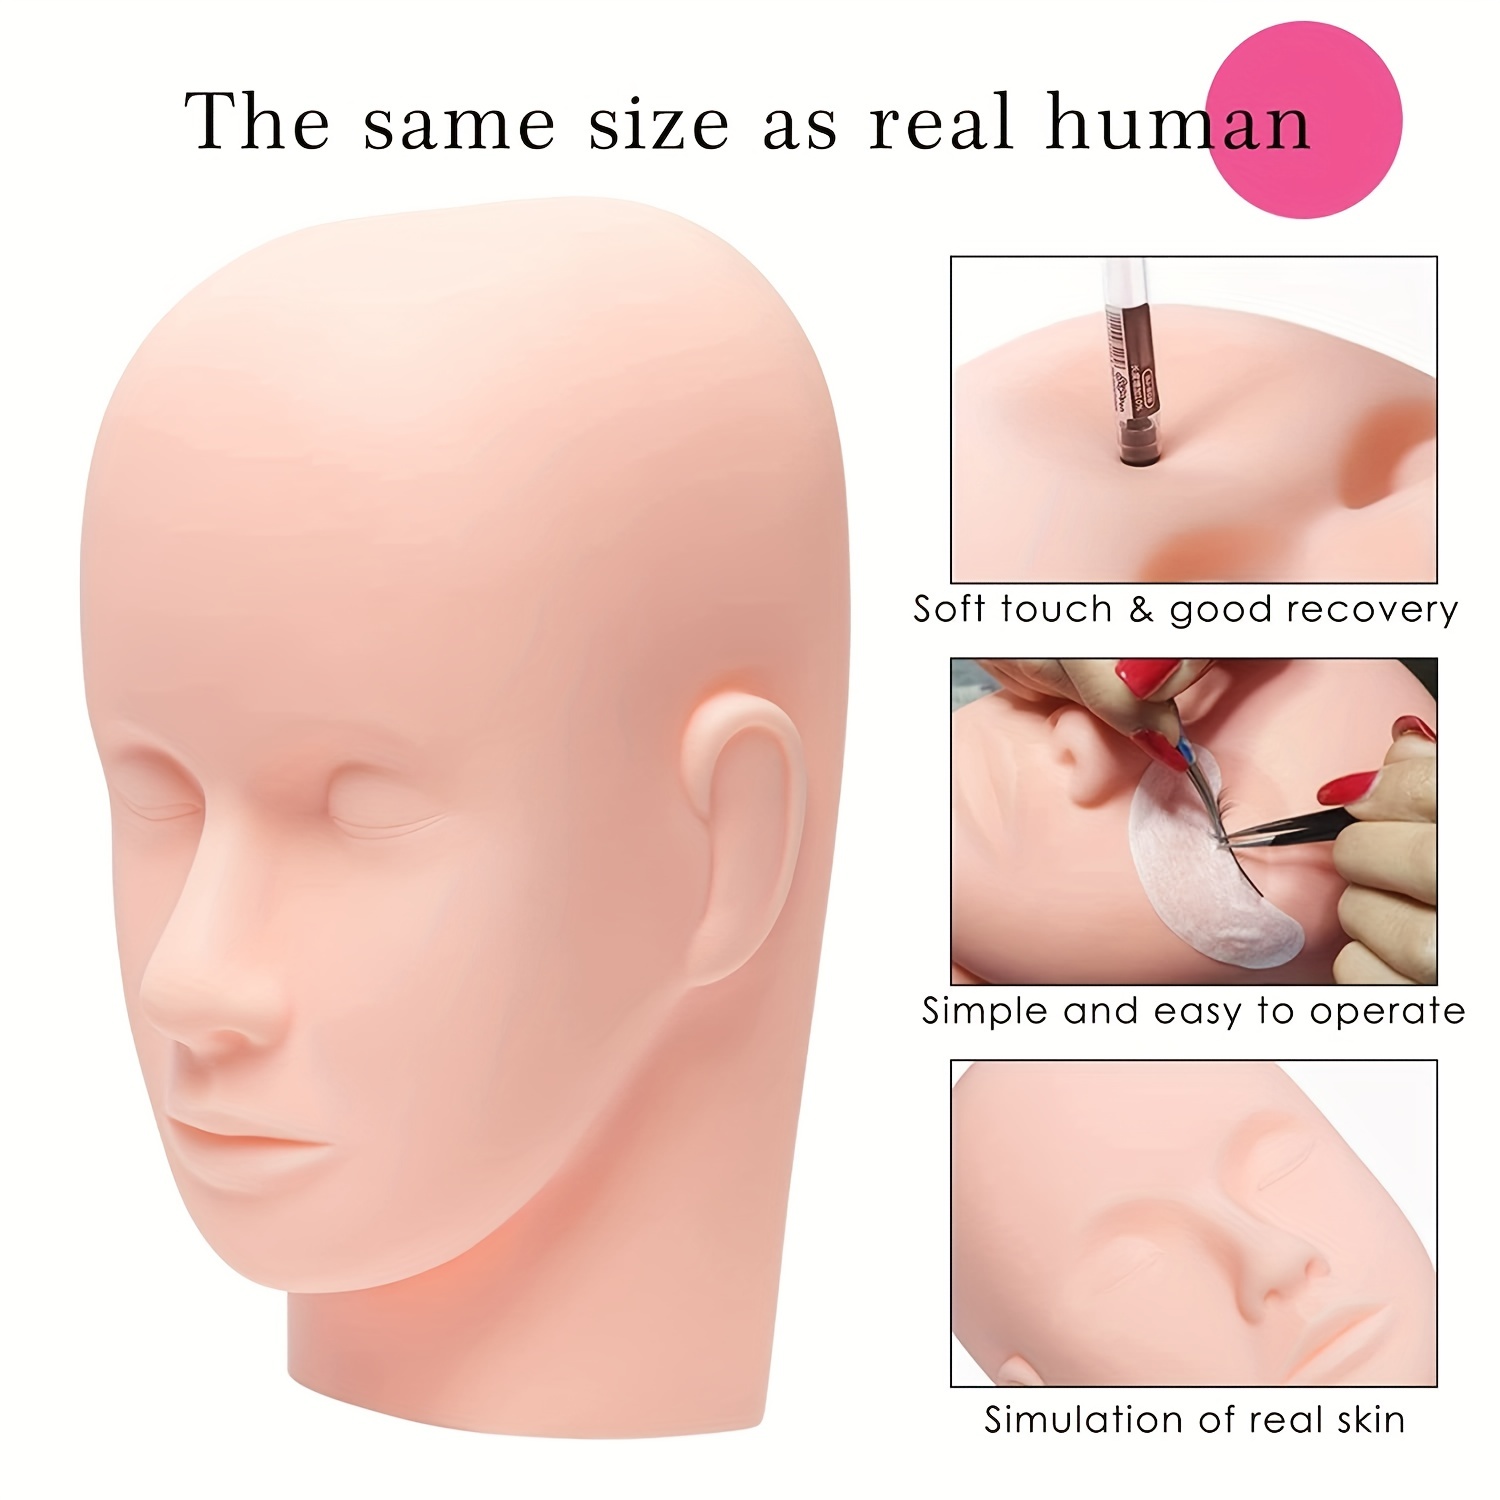 Soft Rubber Massage Eyelash Training Head Eyelash Extension Cosmetology  Mannequin Doll Face Head For Makeup Practice